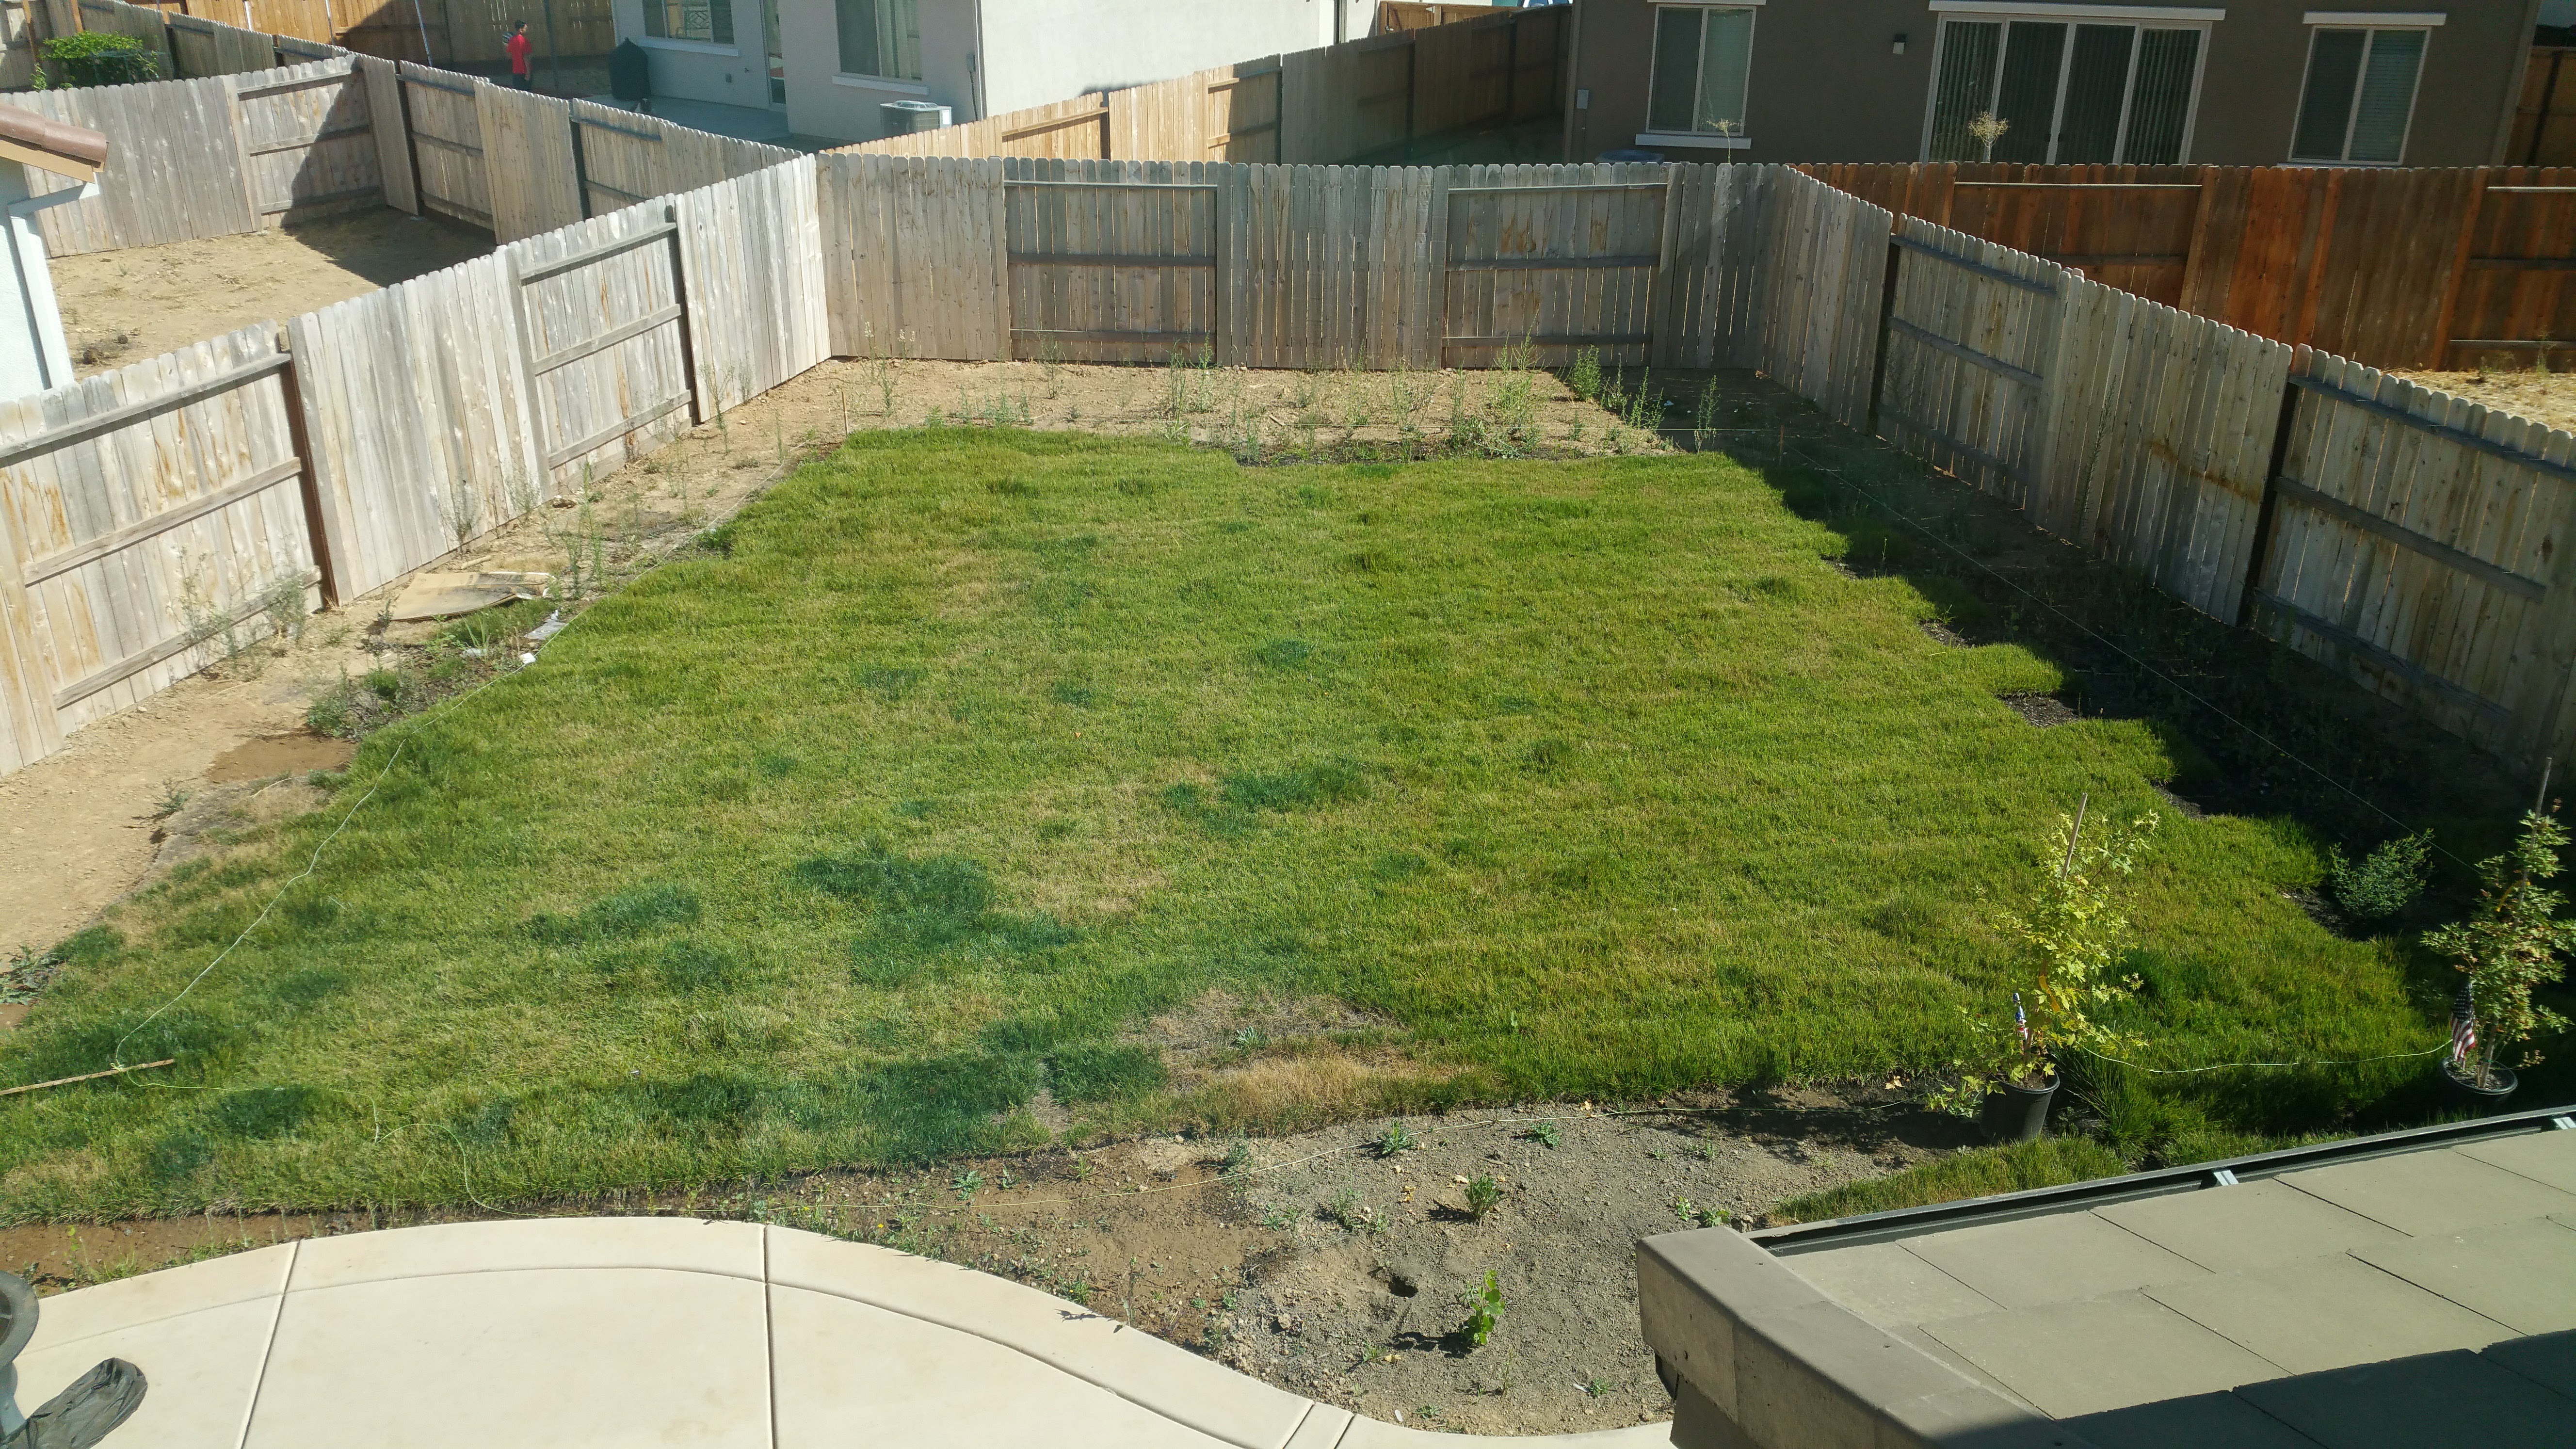 Unfinished back yard. Weed growing underneath. Landscape is not leveled. Grass level is higher than concrete. Right side not finished laying SODS. No prior drainage pipe so every time we water it, it 